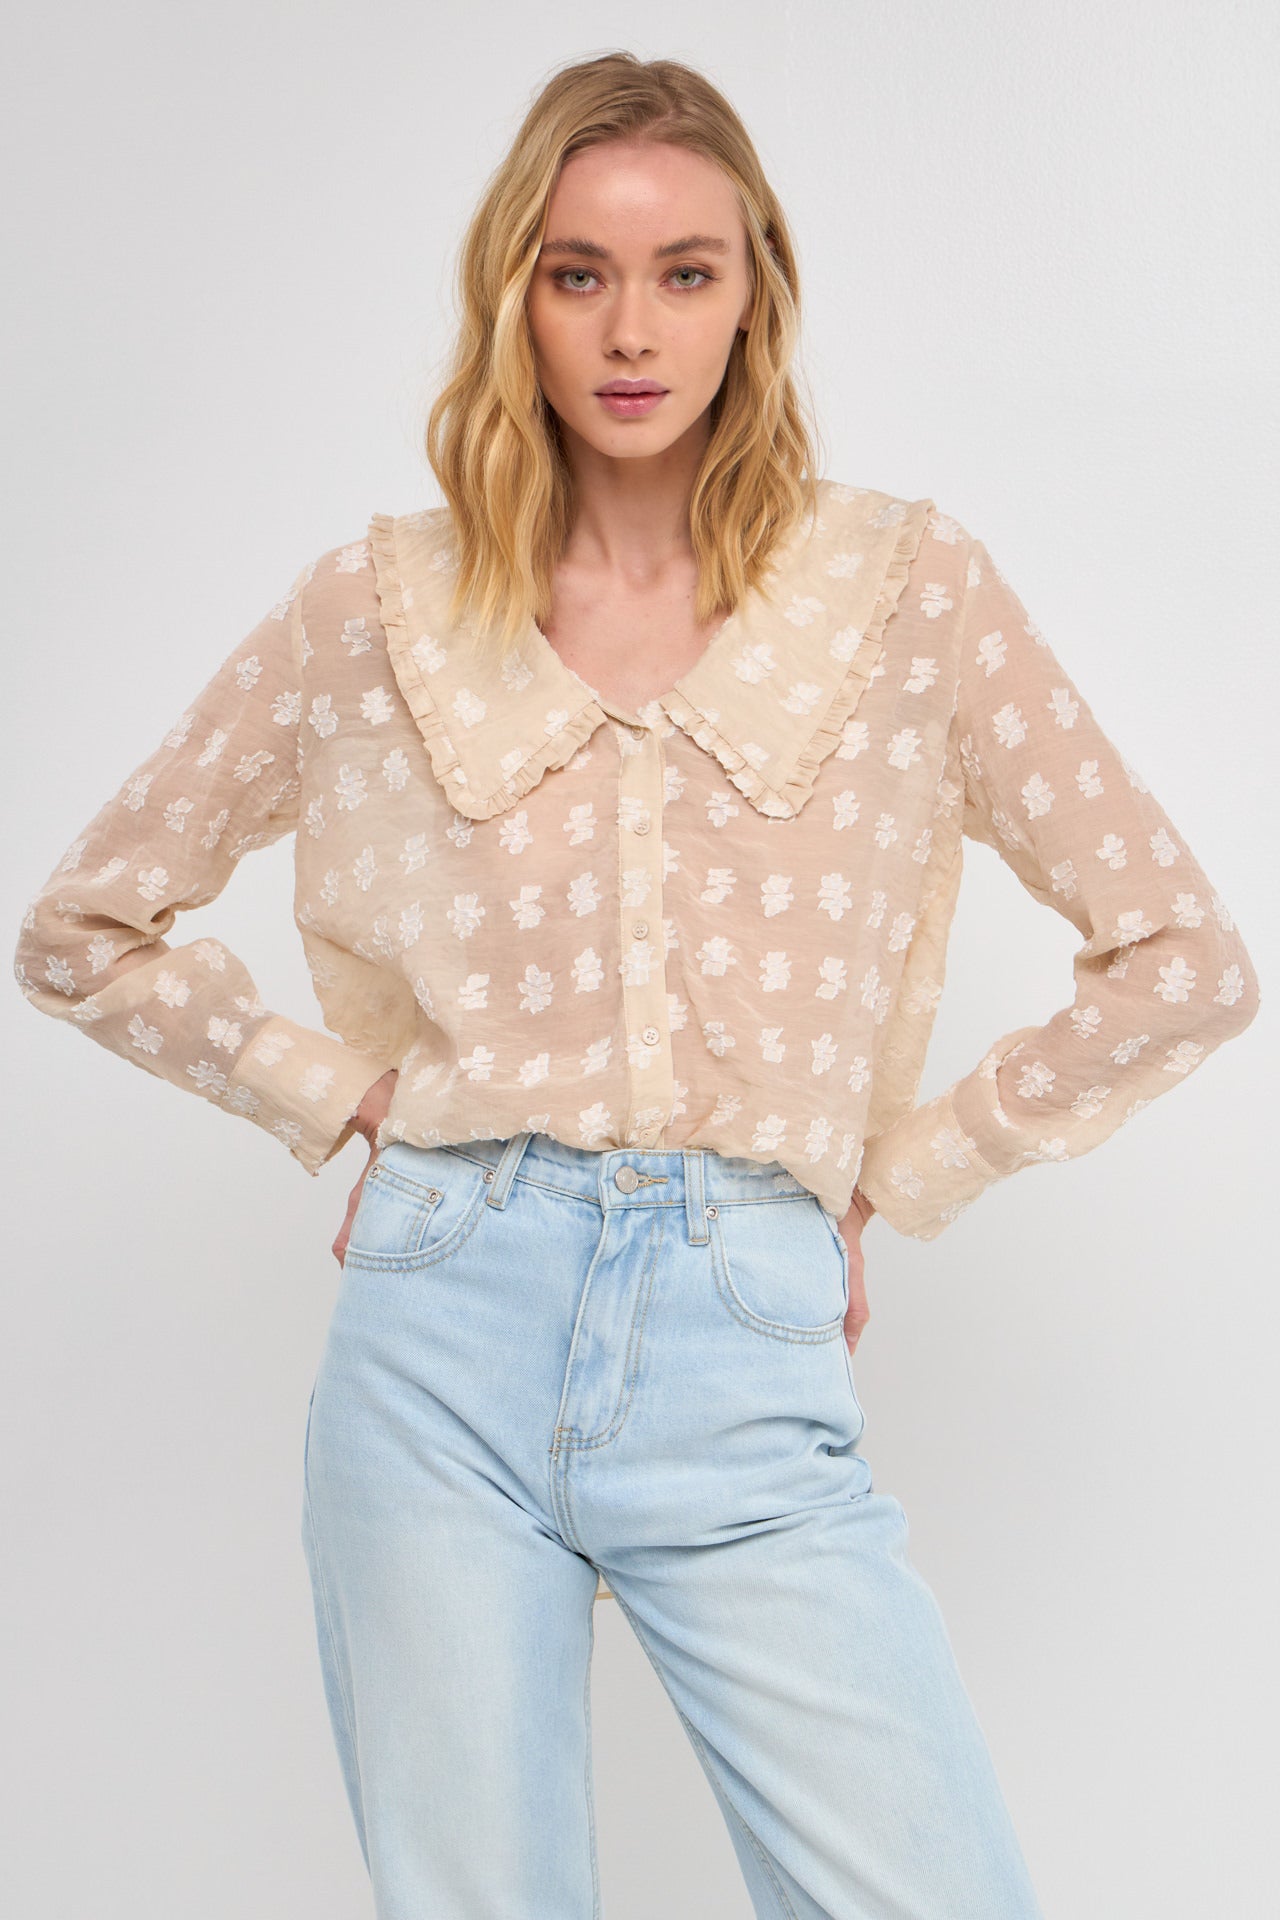 Sheer Shirt with Statement Collar